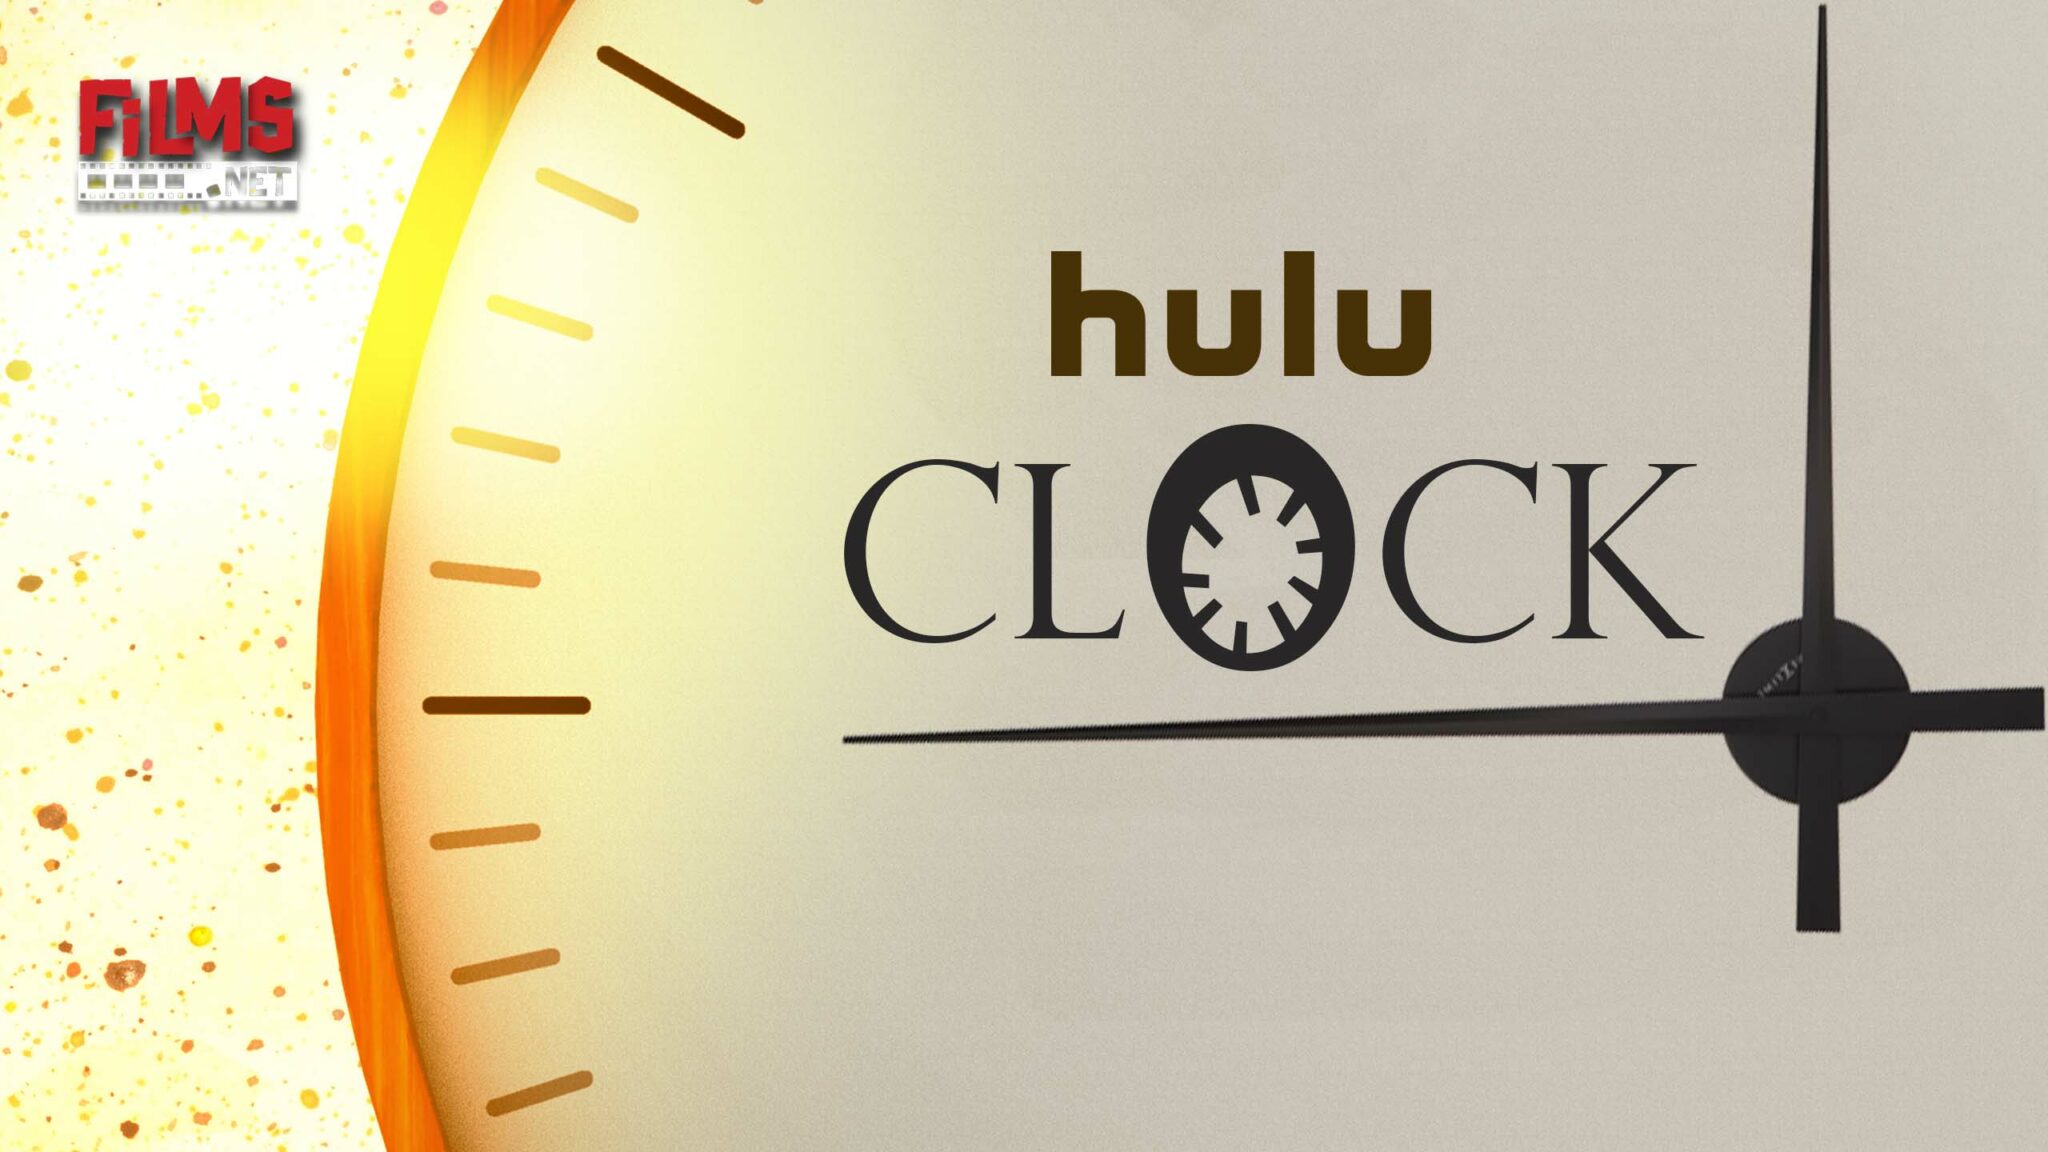 Hulu's Clock A Thrilling New Series with an Enigmatic Plot